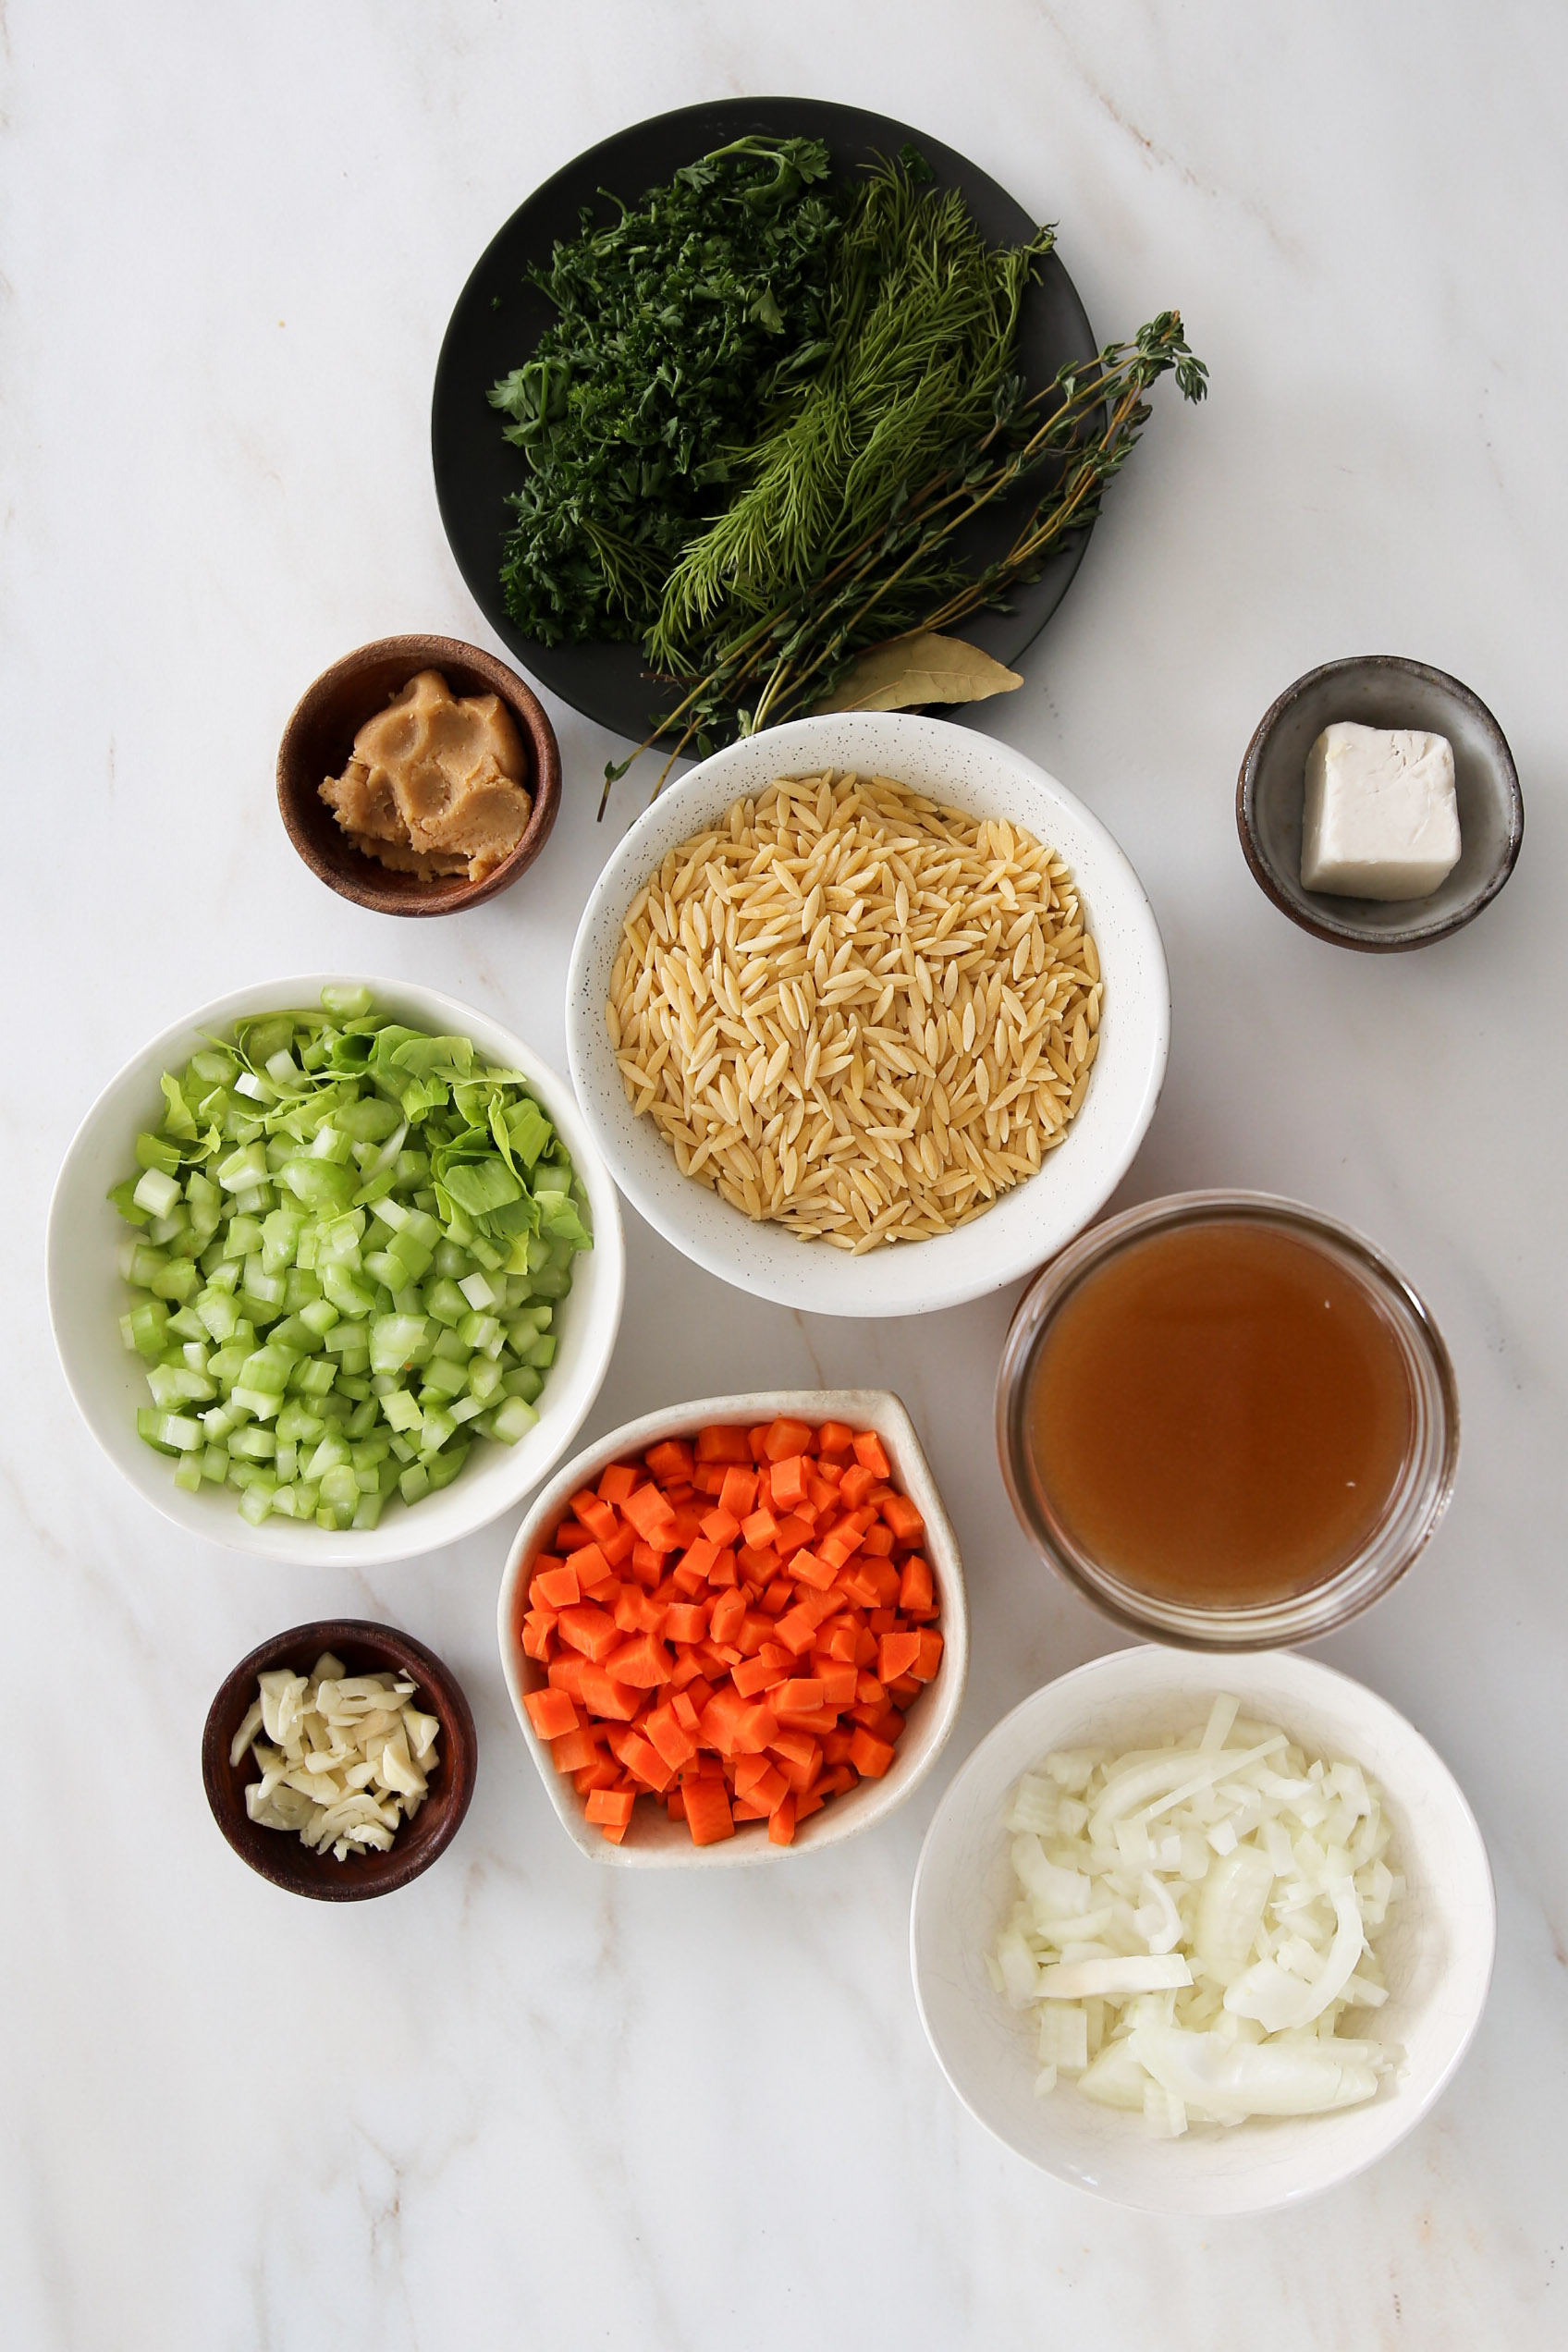 A bowl of vegan noodle soup with carrots, onions, and other ingredients.